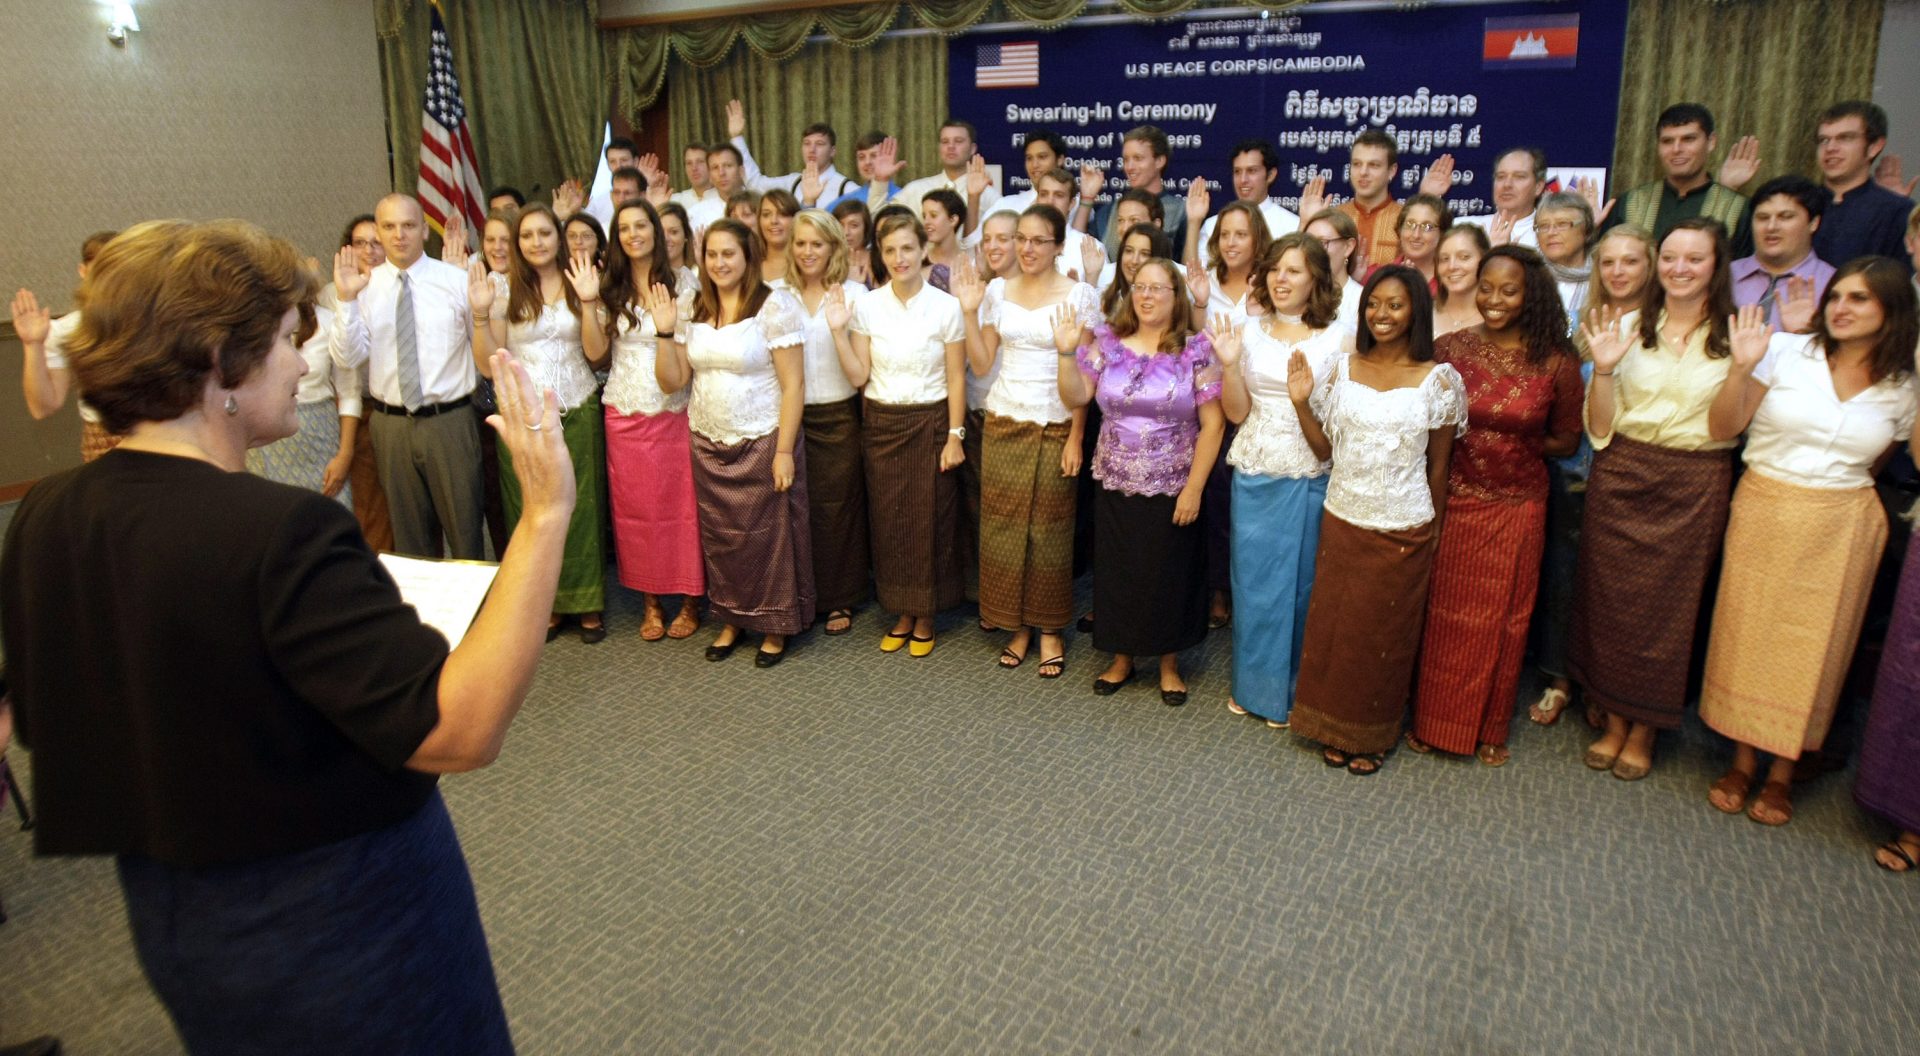 U.S. Peace Corps volunteers raise their hands to swear in during a ceremony in Phnom Penh, Cambodia, on Monday, Oct. 3, 2011. More than 100 Peace Corps volunteers on Monday held the swearing-in ceremony before joining Cambodian villagers in the southern provinces of Cambodia. 